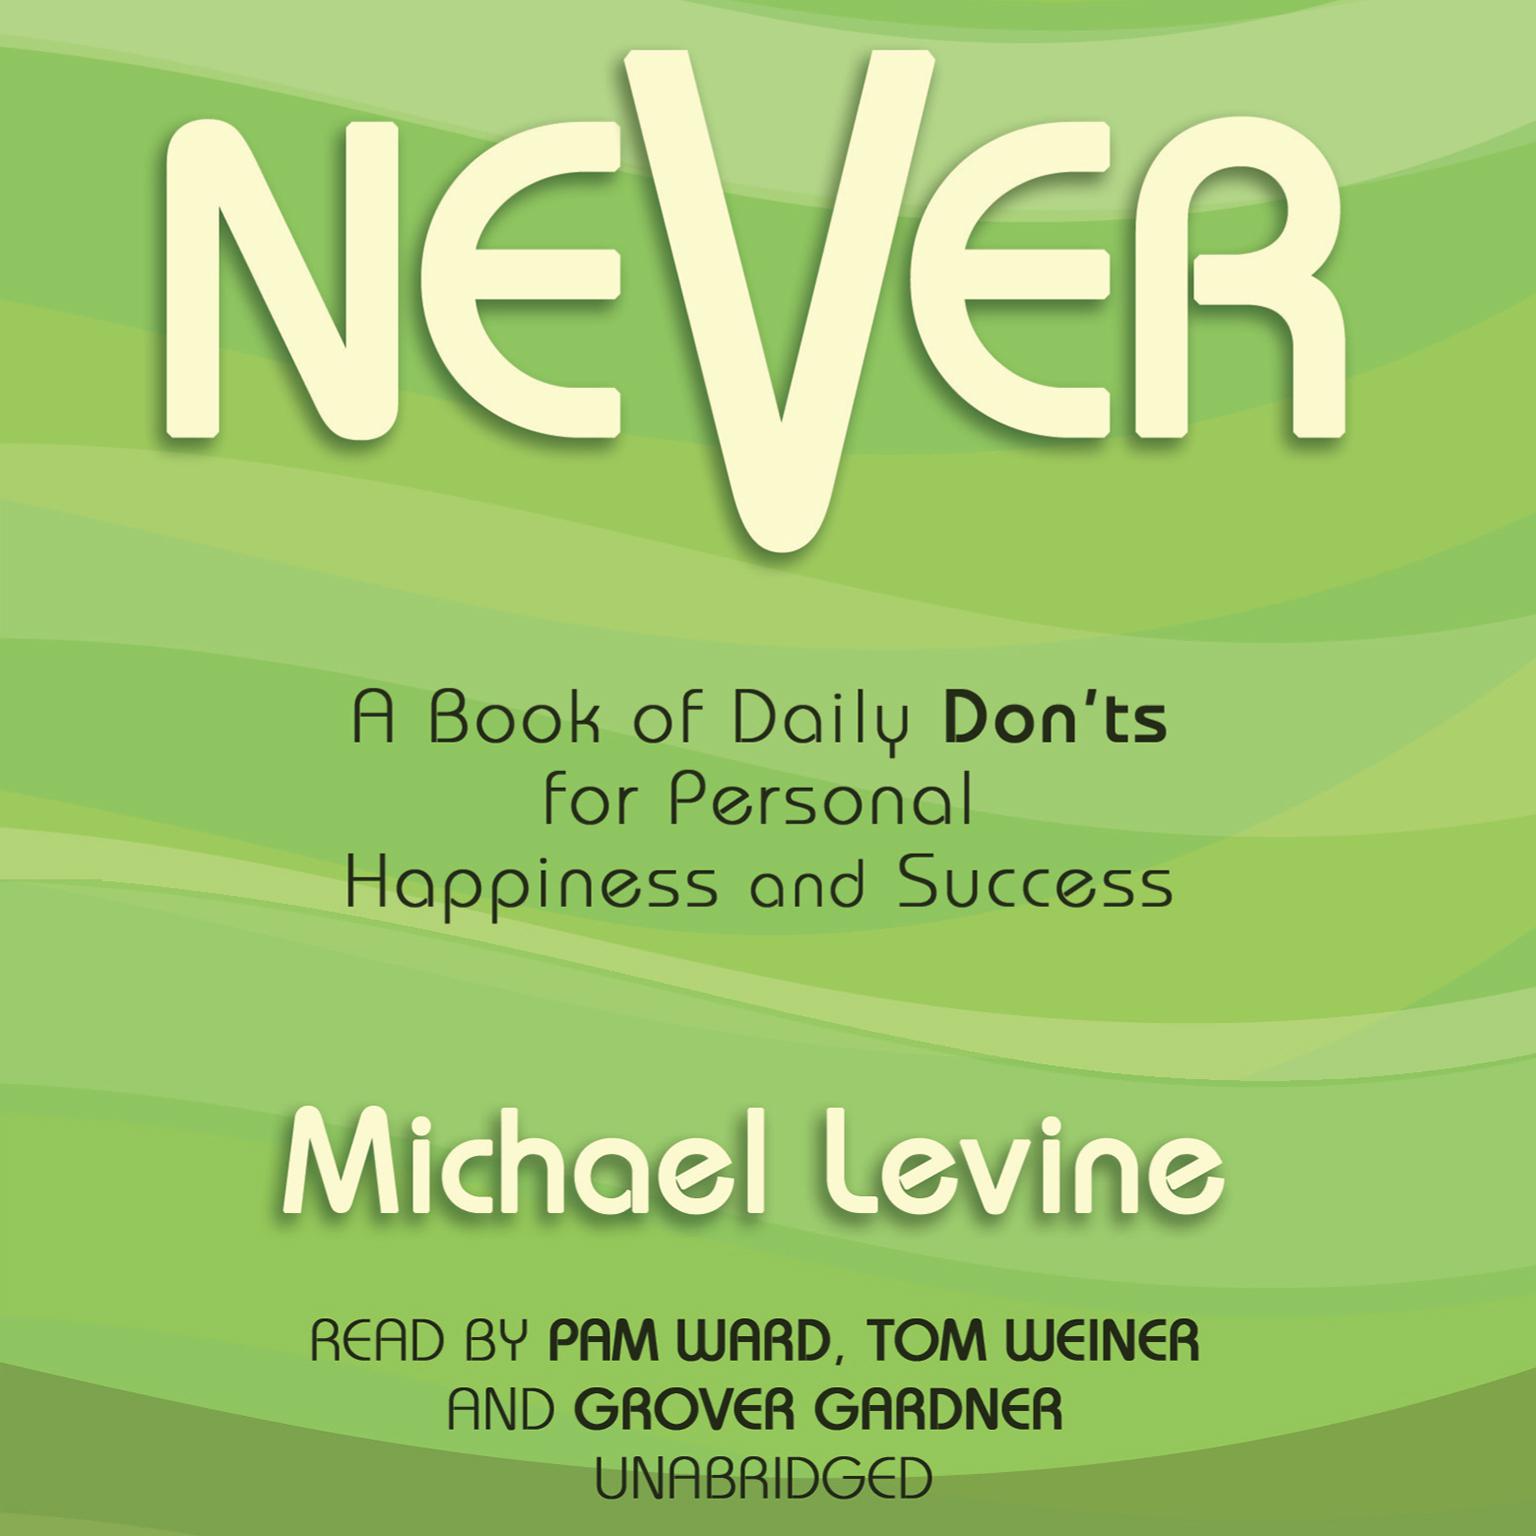 Never: A Book of Daily Don’ts for Personal Happiness and Success Audiobook, by Michael Levine